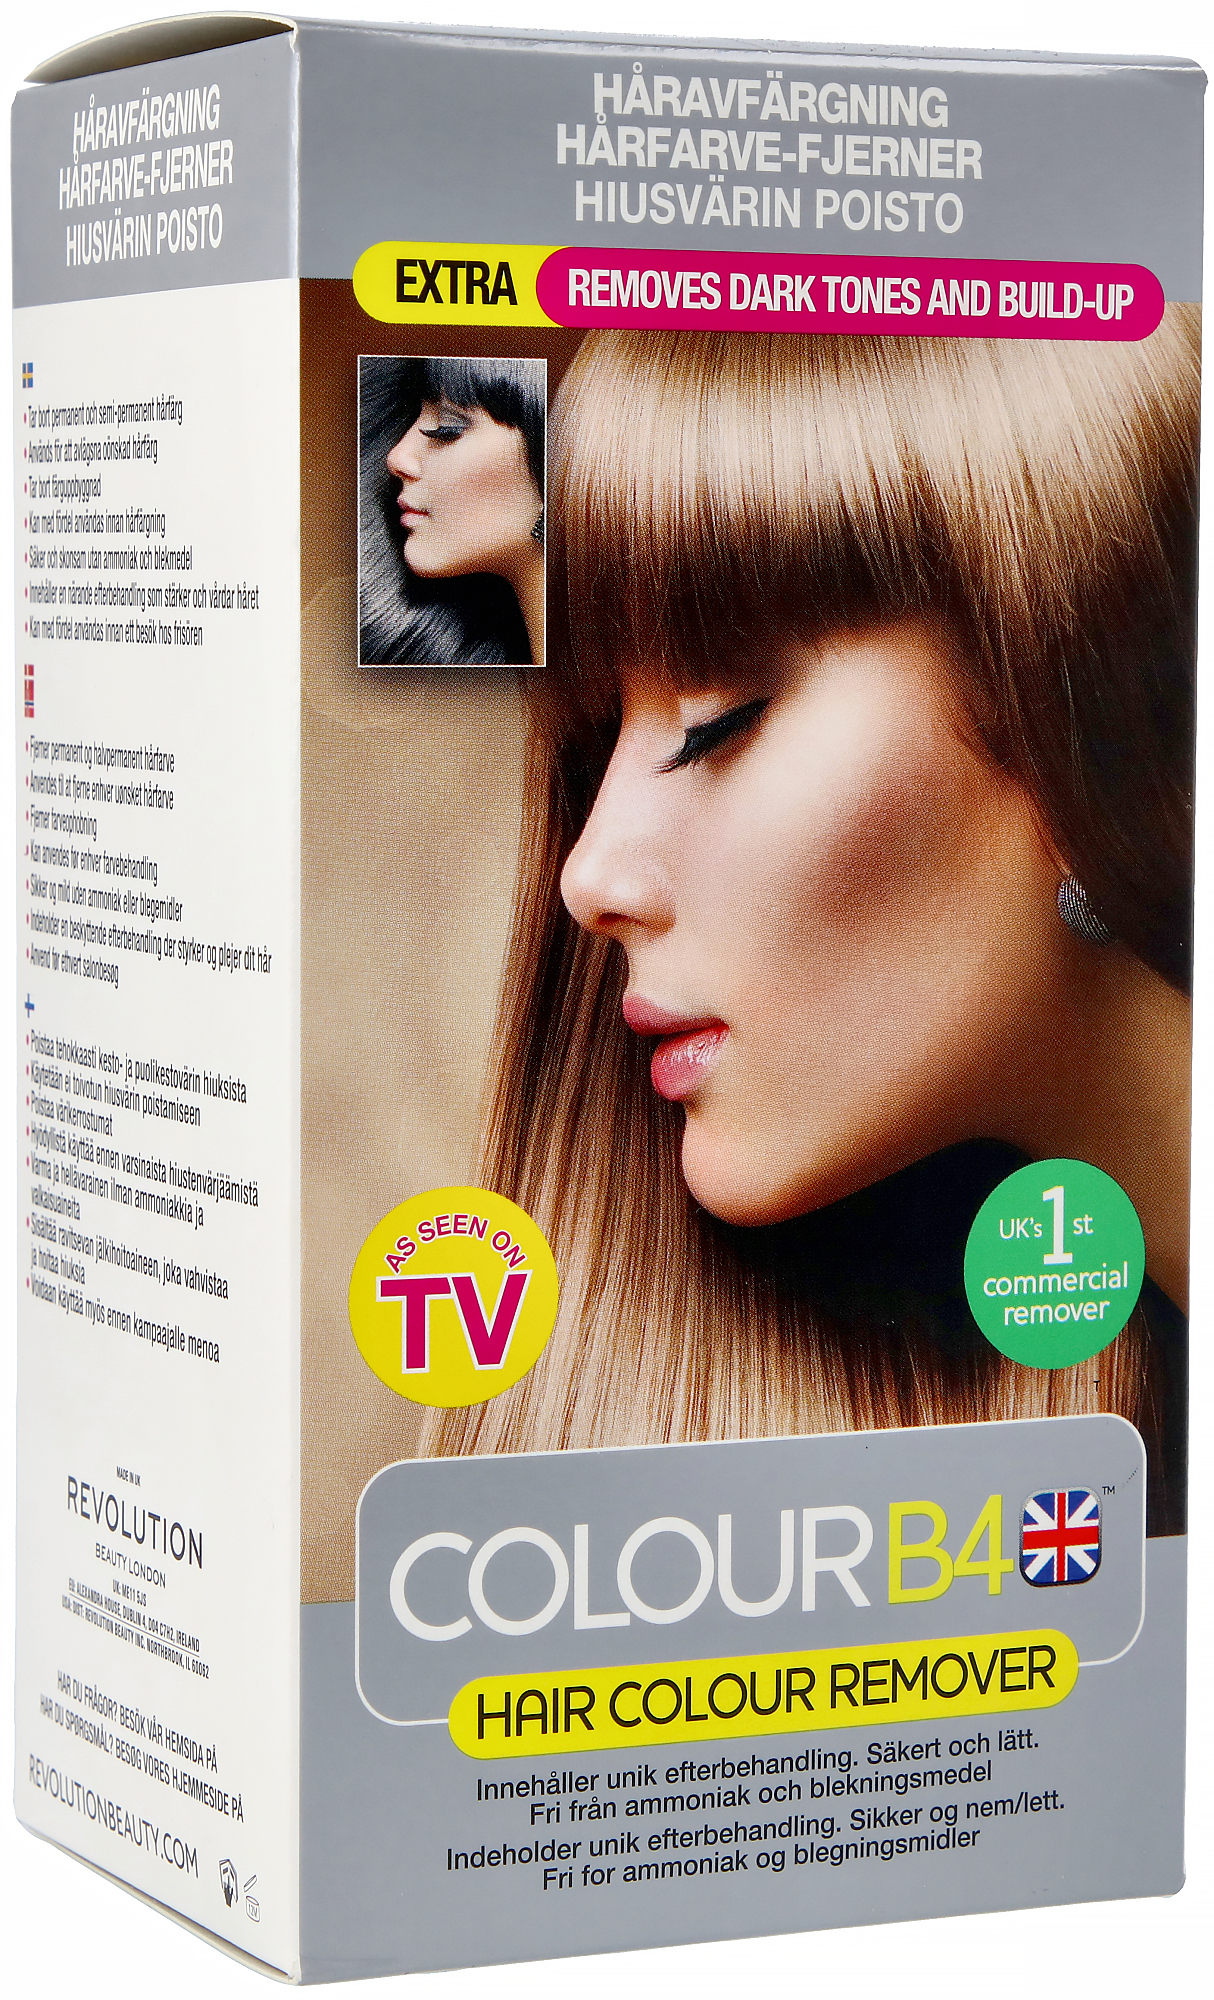 https://lyko.com/globalassets/product-images/colourb4-haircolour-remover-extra-strenght-2263-101-0001_1.jpg?ref=596099486F